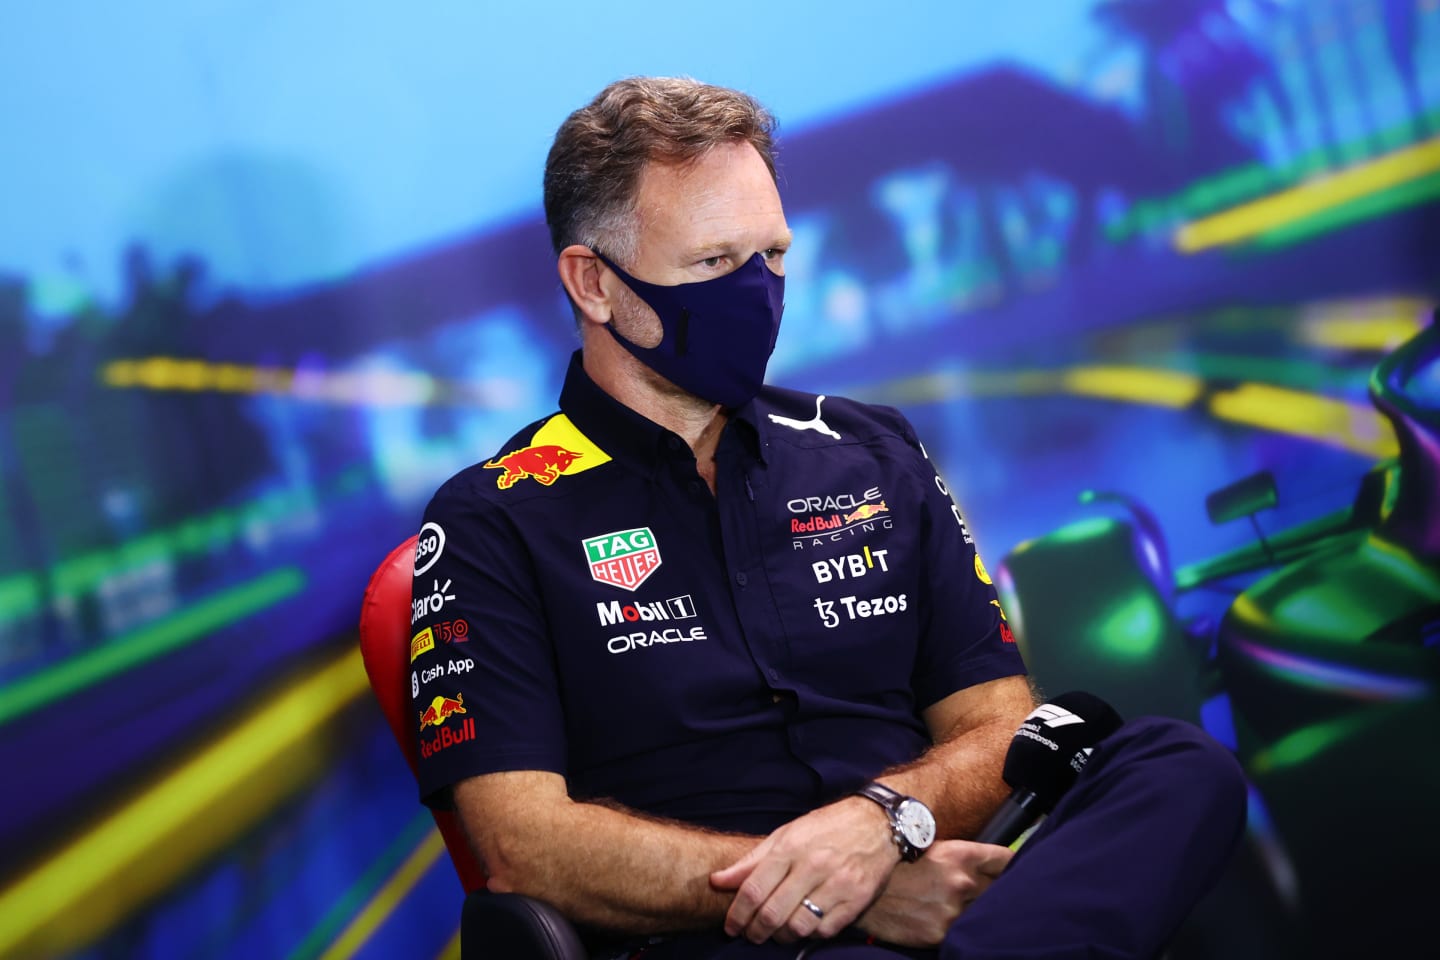 MELBOURNE, AUSTRALIA - APRIL 09: Red Bull Racing Team Principal Christian Horner talks in the Team Principals Press Conference prior to final practice ahead of the F1 Grand Prix of Australia at Melbourne Grand Prix Circuit on April 09, 2022 in Melbourne, Australia. (Photo by Dan Istitene - Formula 1/Formula 1 via Getty Images)